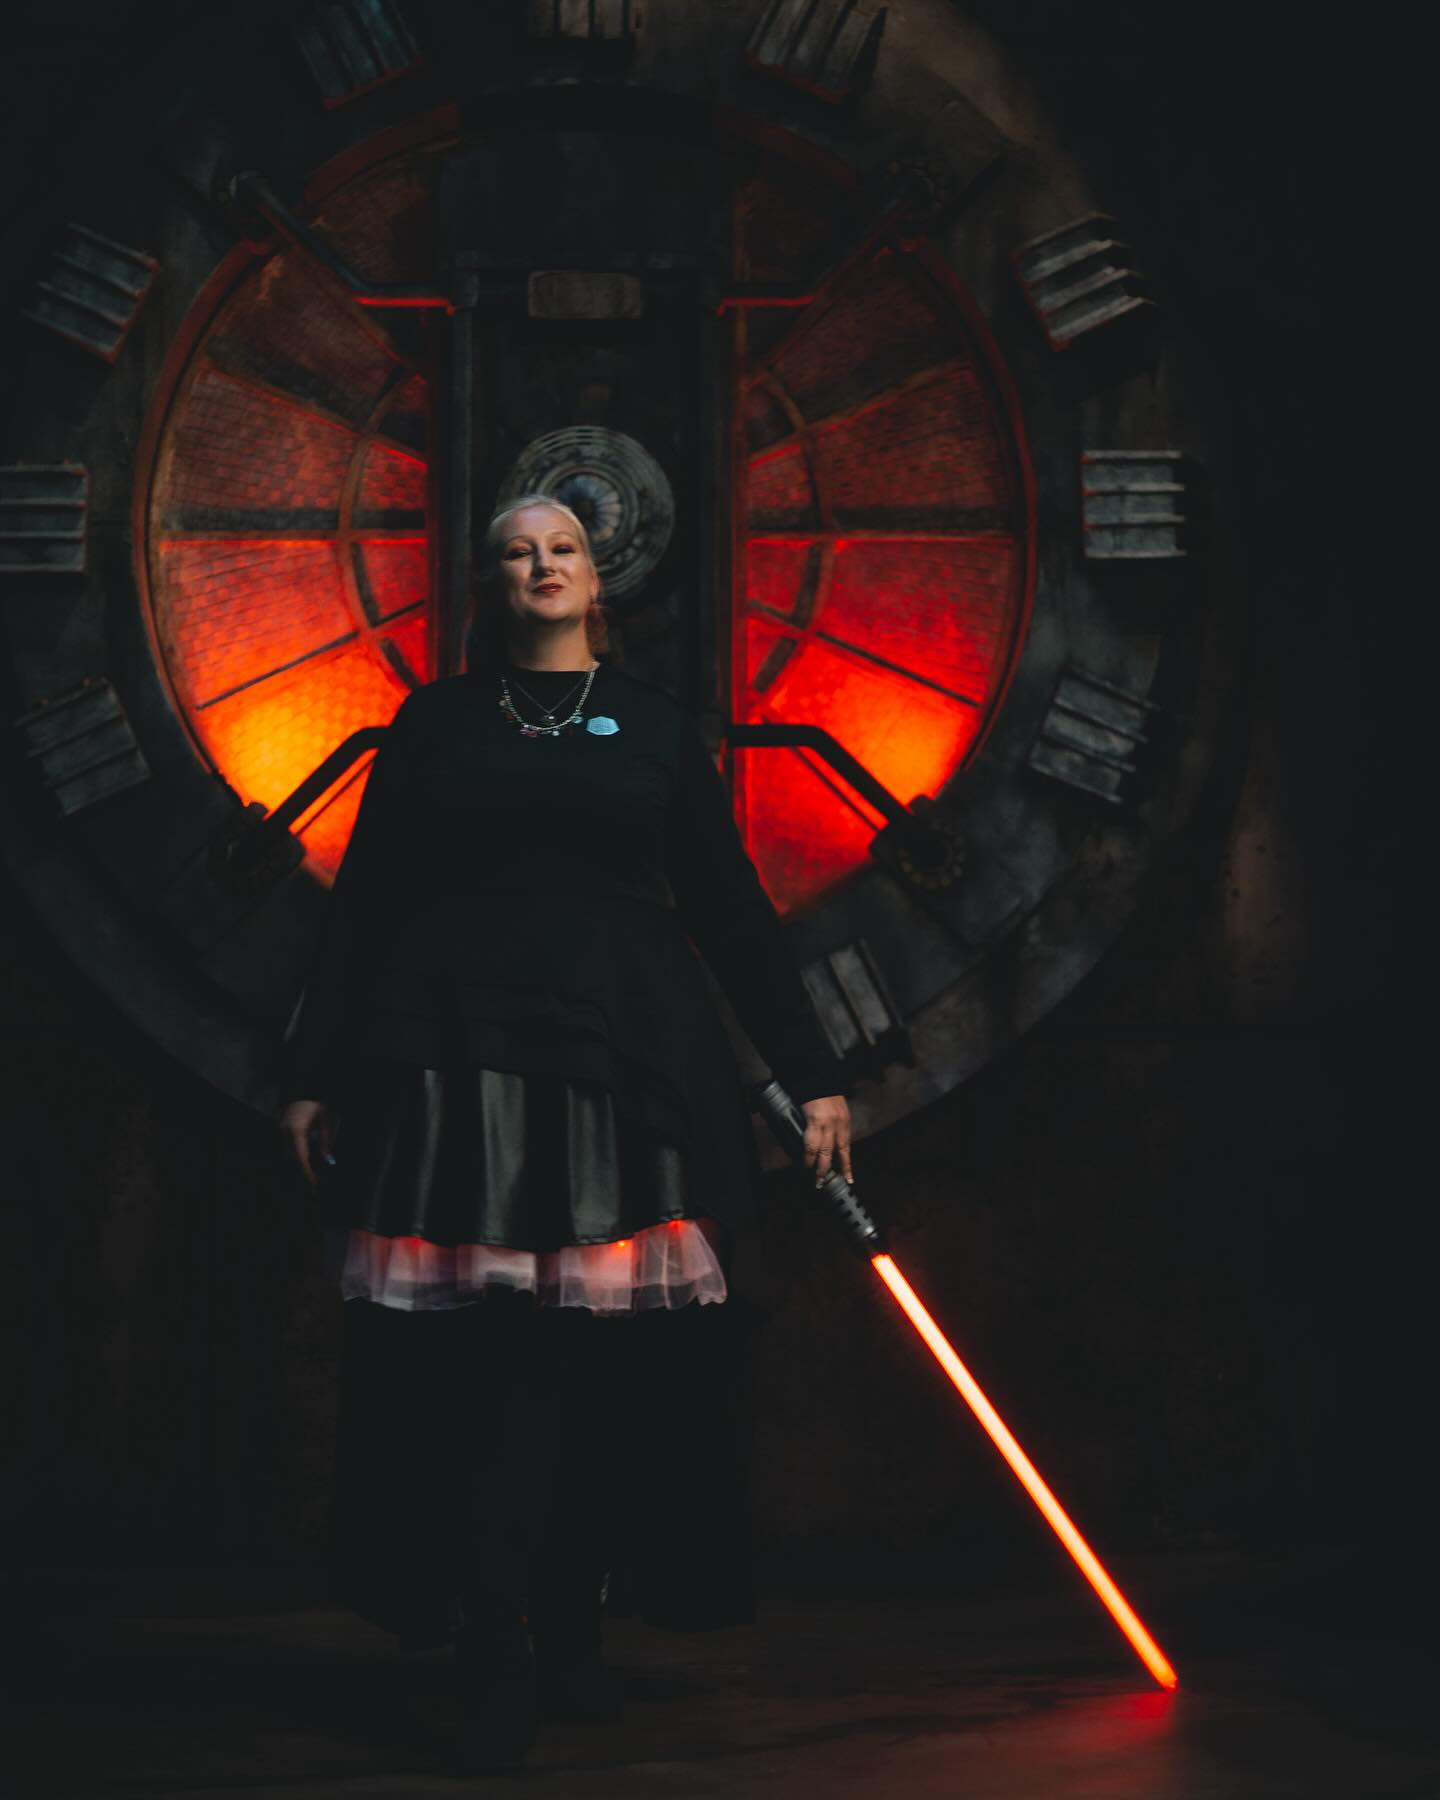 Peace is a lie, there is only passion.
Through passion, I gain strength.
Through strength, I gain power.
Through power, I gain victory.
Through victory, my chains are broken.
💢🖤💢 The Force shall free me 💢🖤💢

- The Code of the Sith